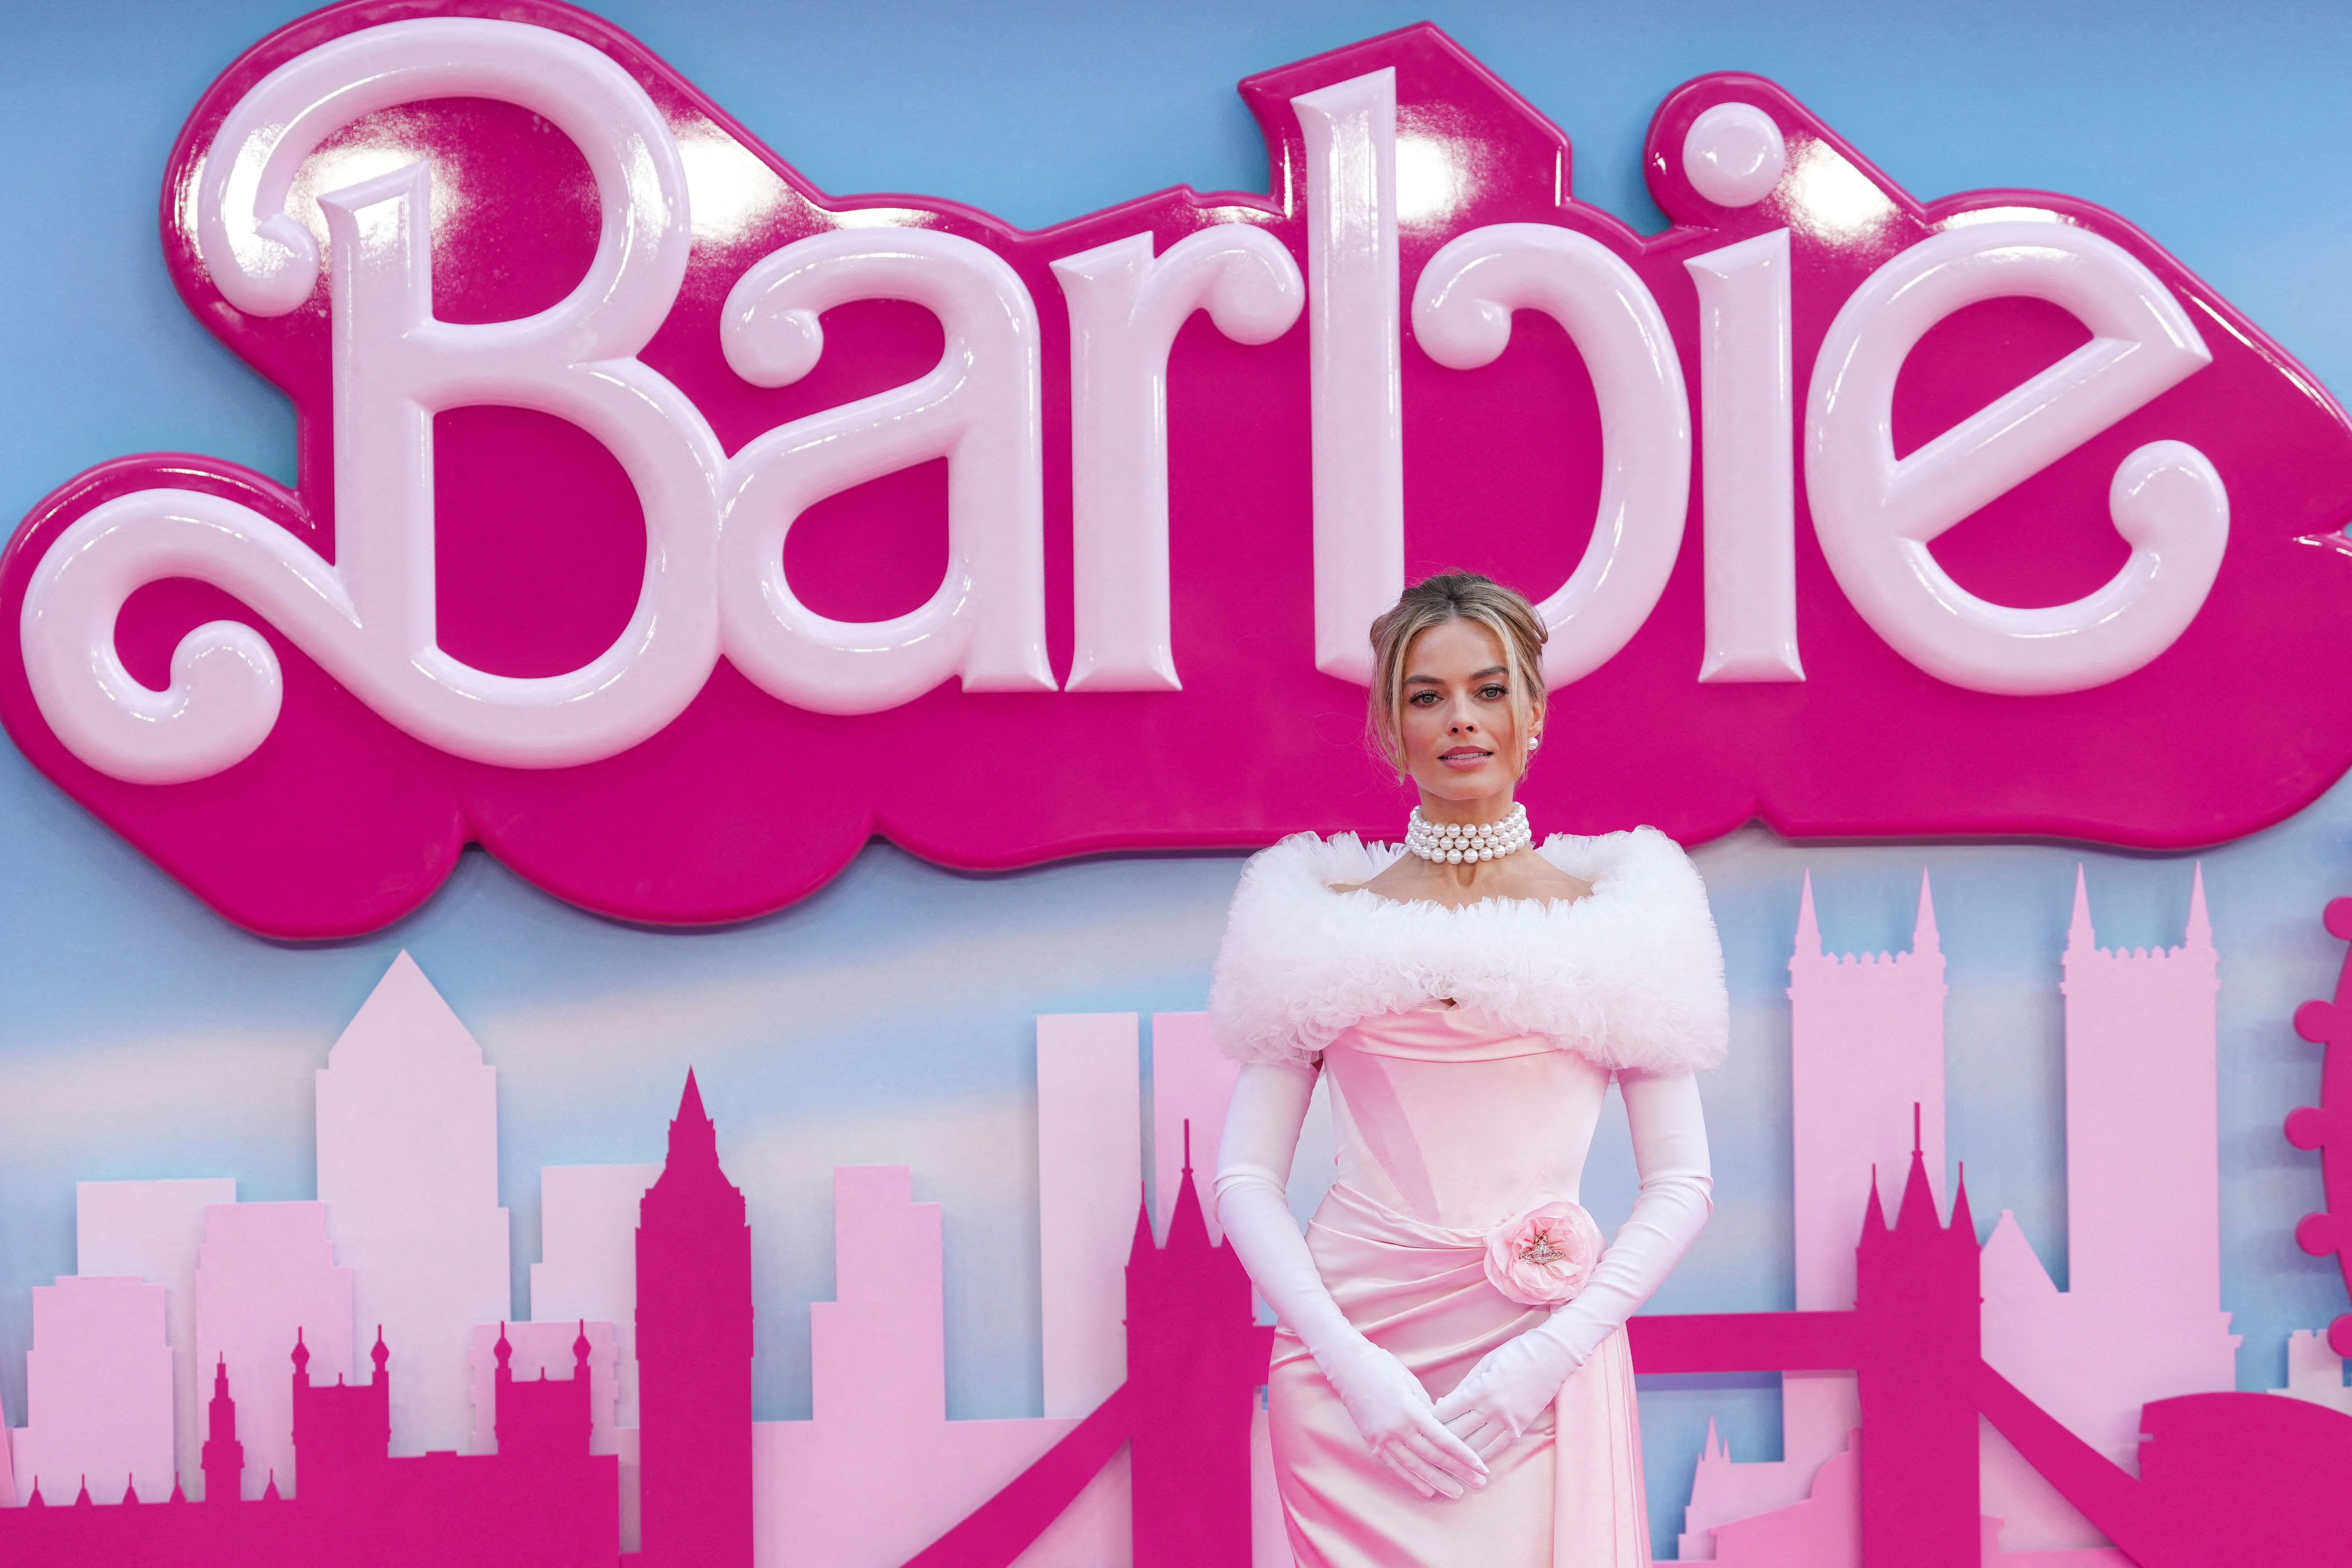 Barbie' movie debut shines even brighter as final tally rises